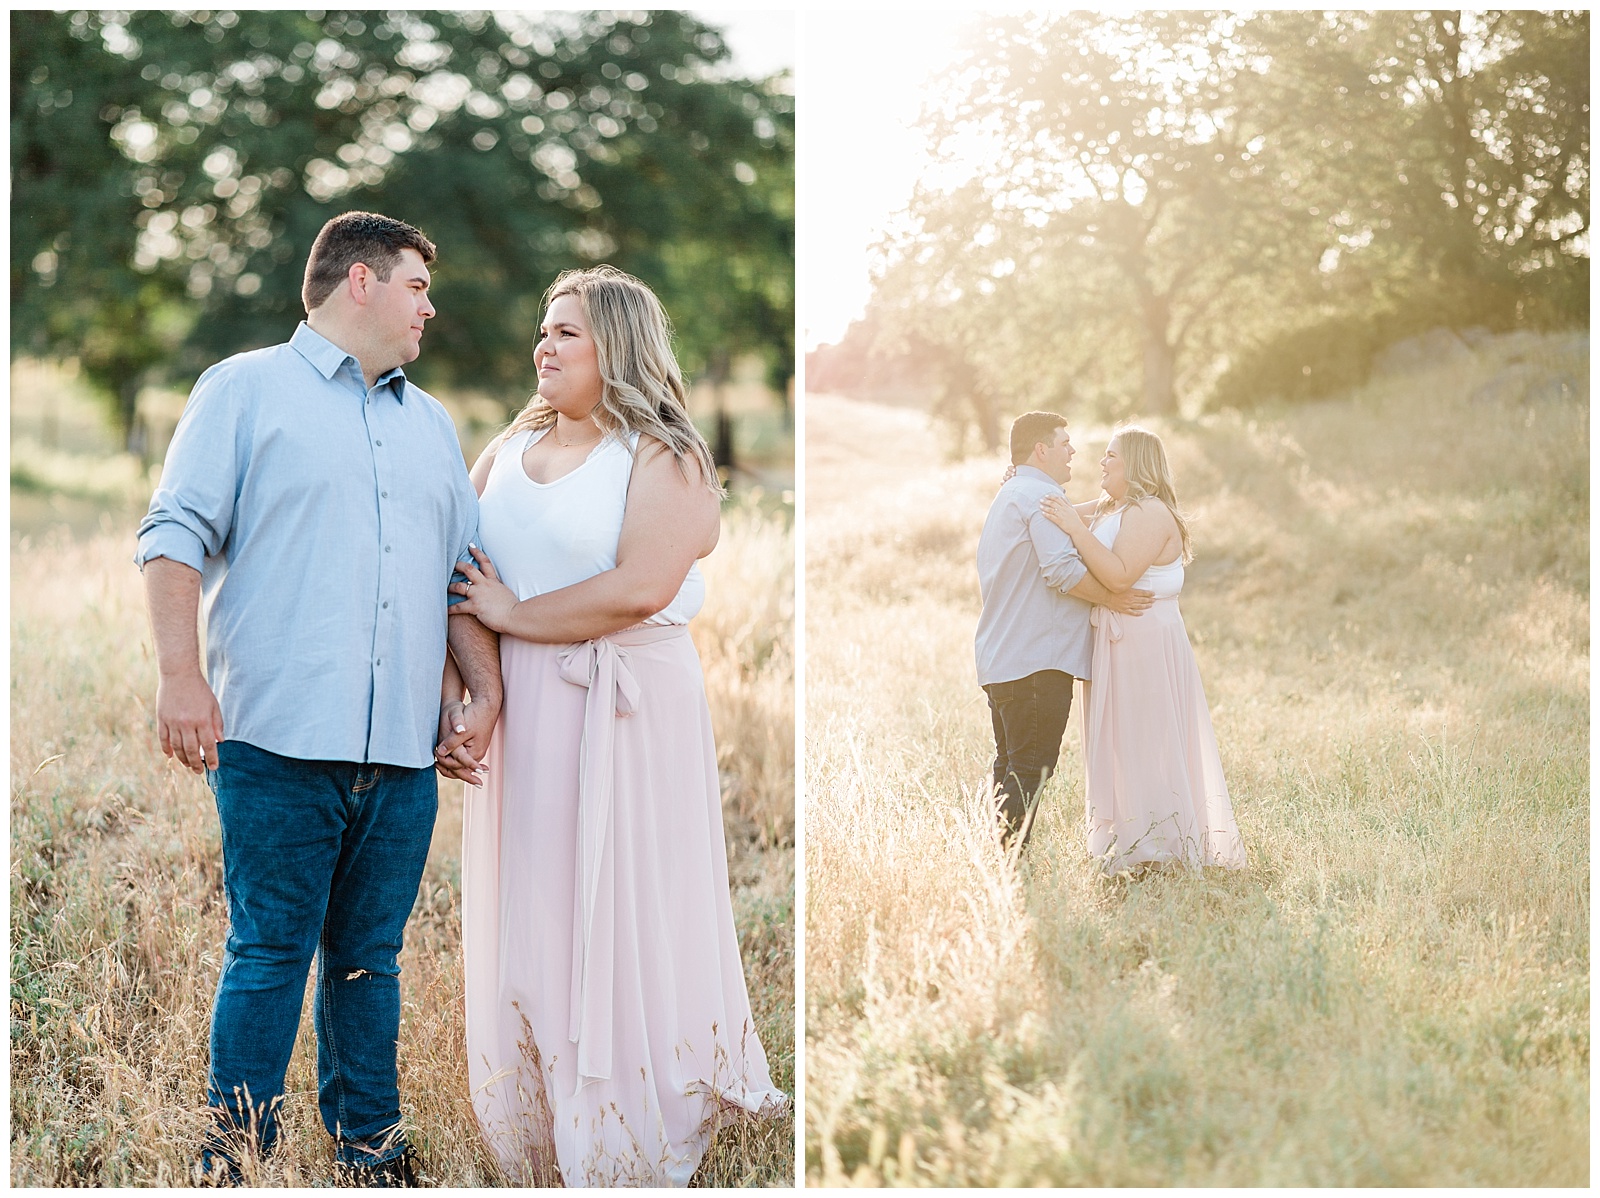 candid moments between a newly engaged couple during an engagement session